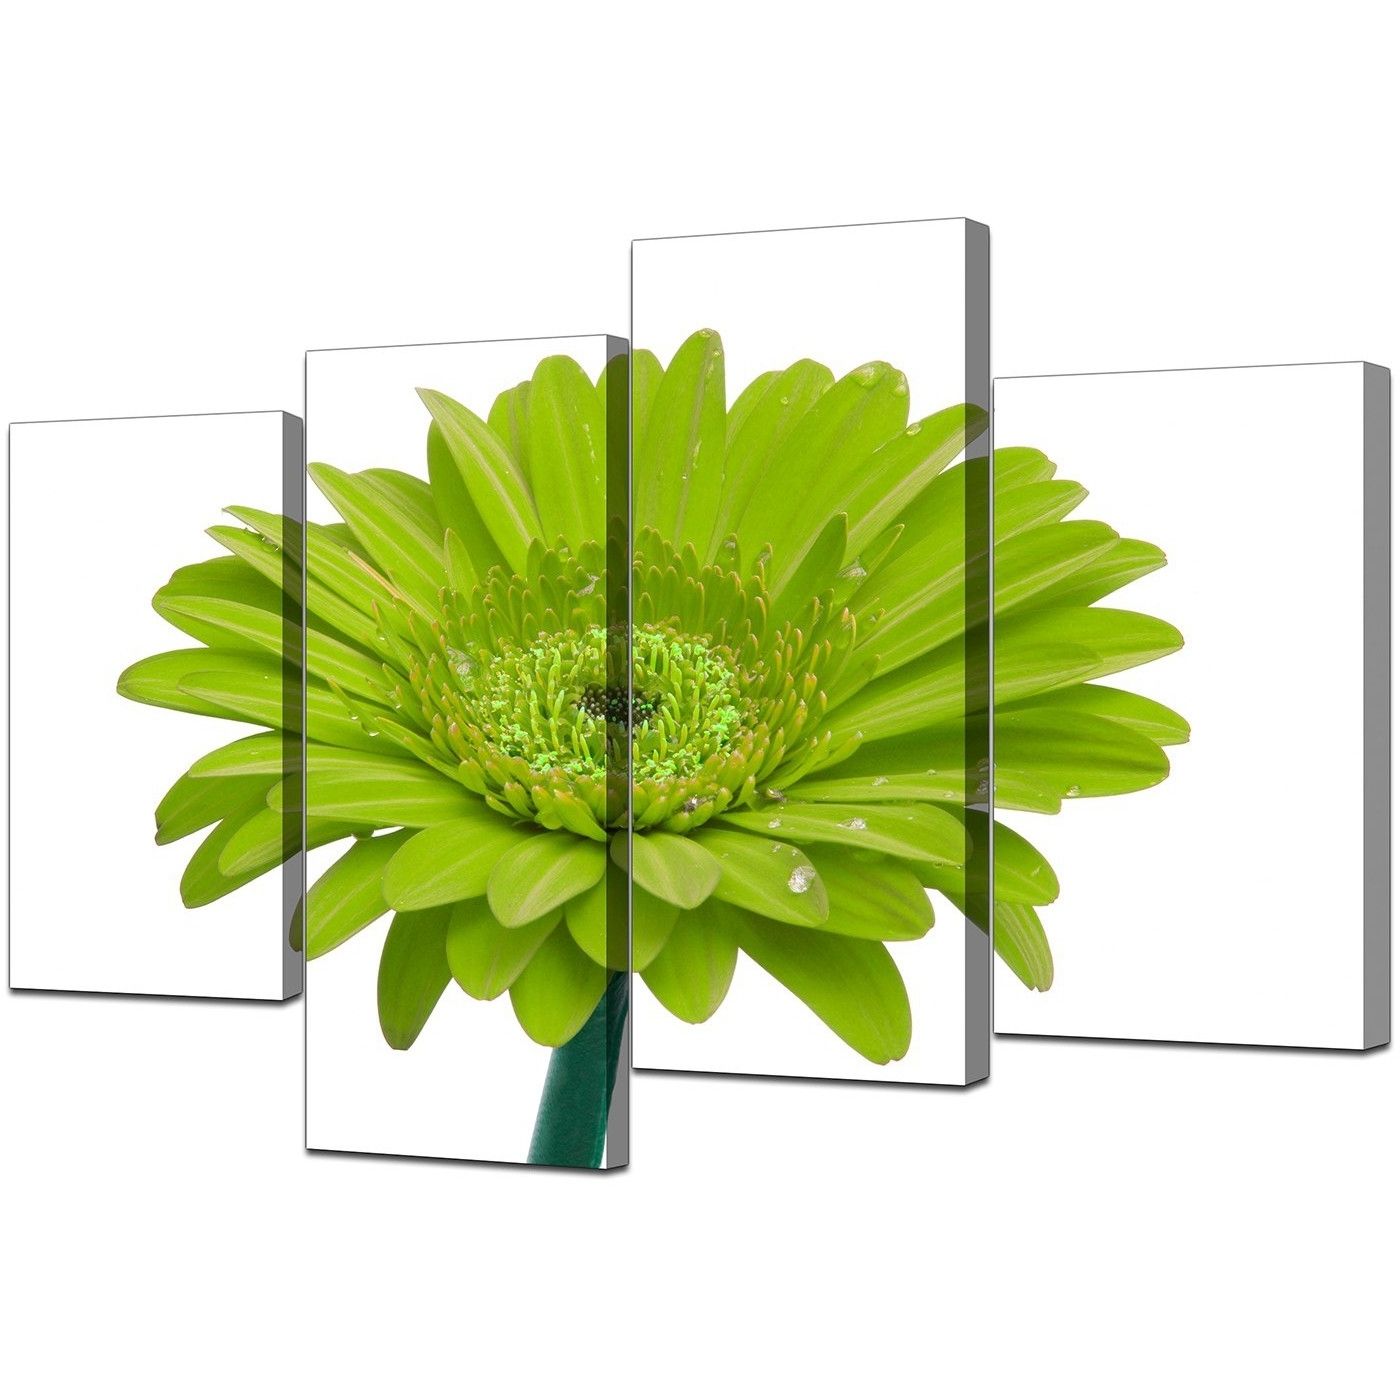 Popular Canvas Wall Art Of Flower In Lime Green For Your Living Room Within Lime Green Wall Art (View 3 of 15)